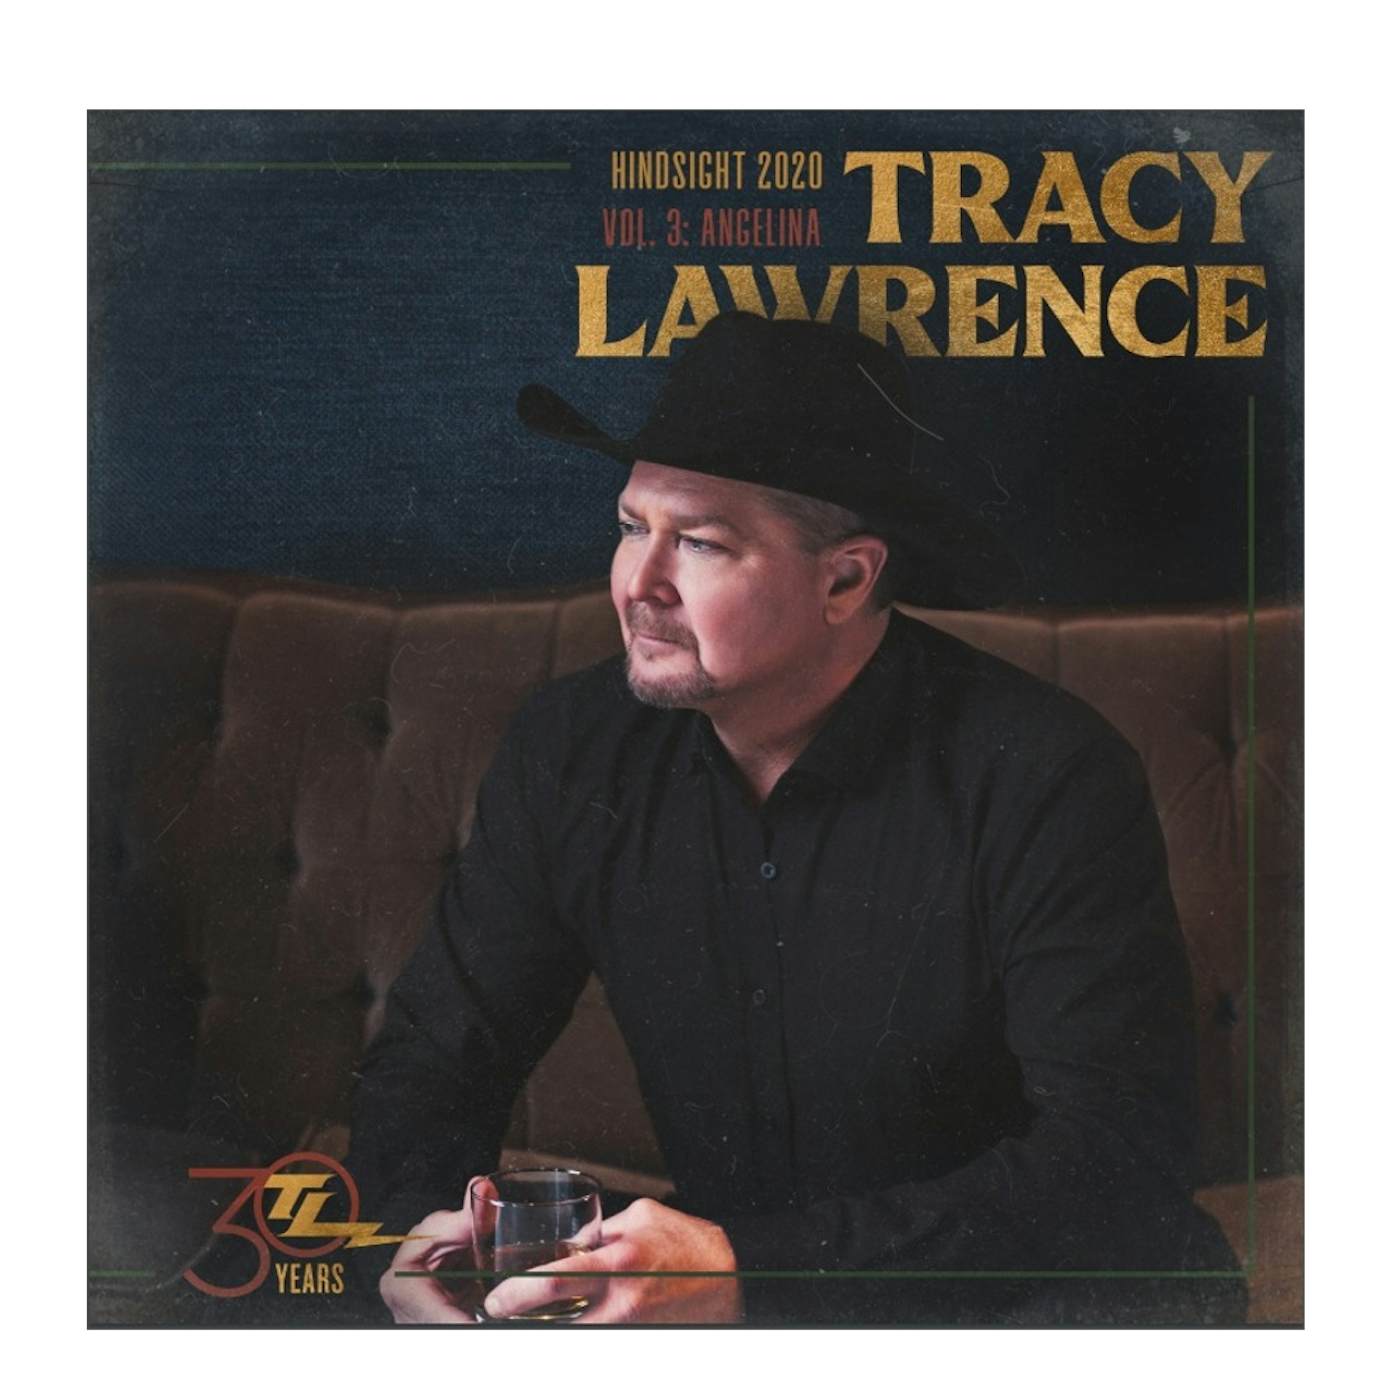 Tracy Lawrence CD- Hindsight 2020: Volume 3